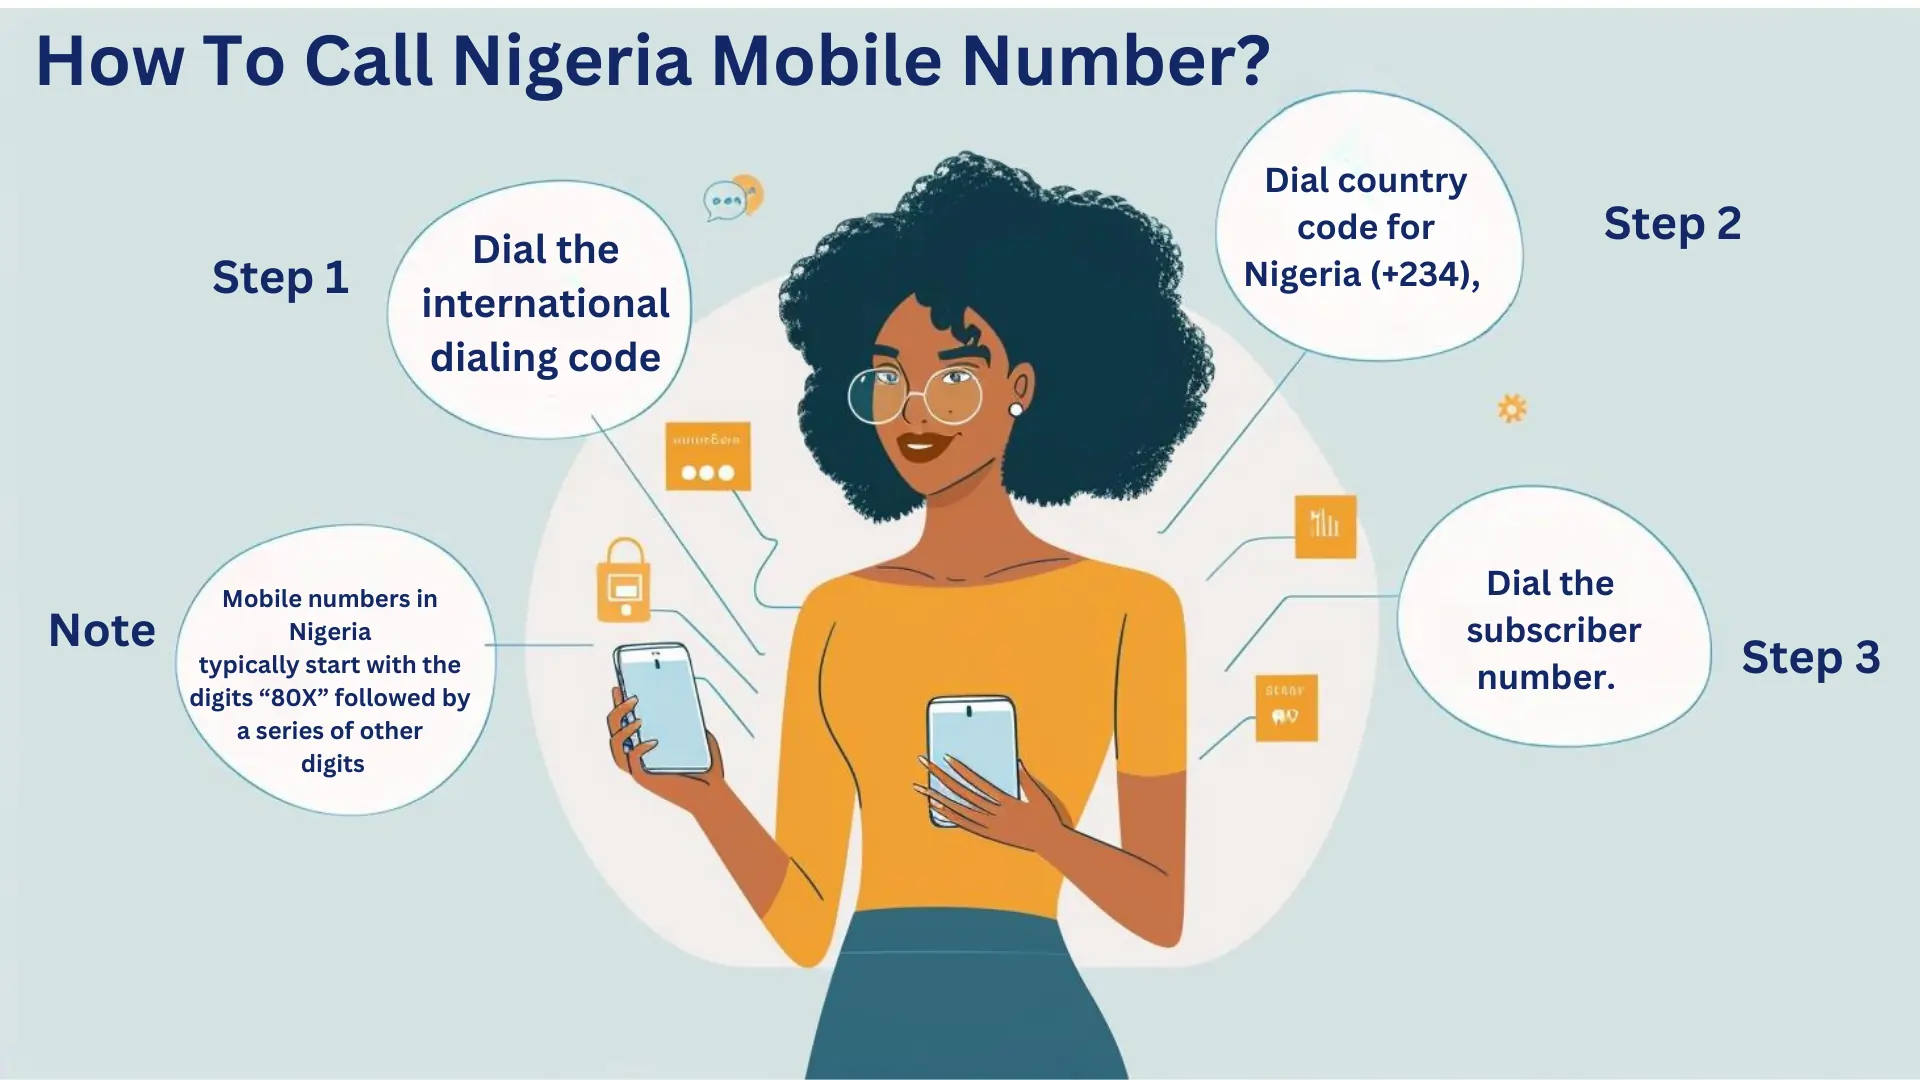 How To Call Nigeria Mobile Number?